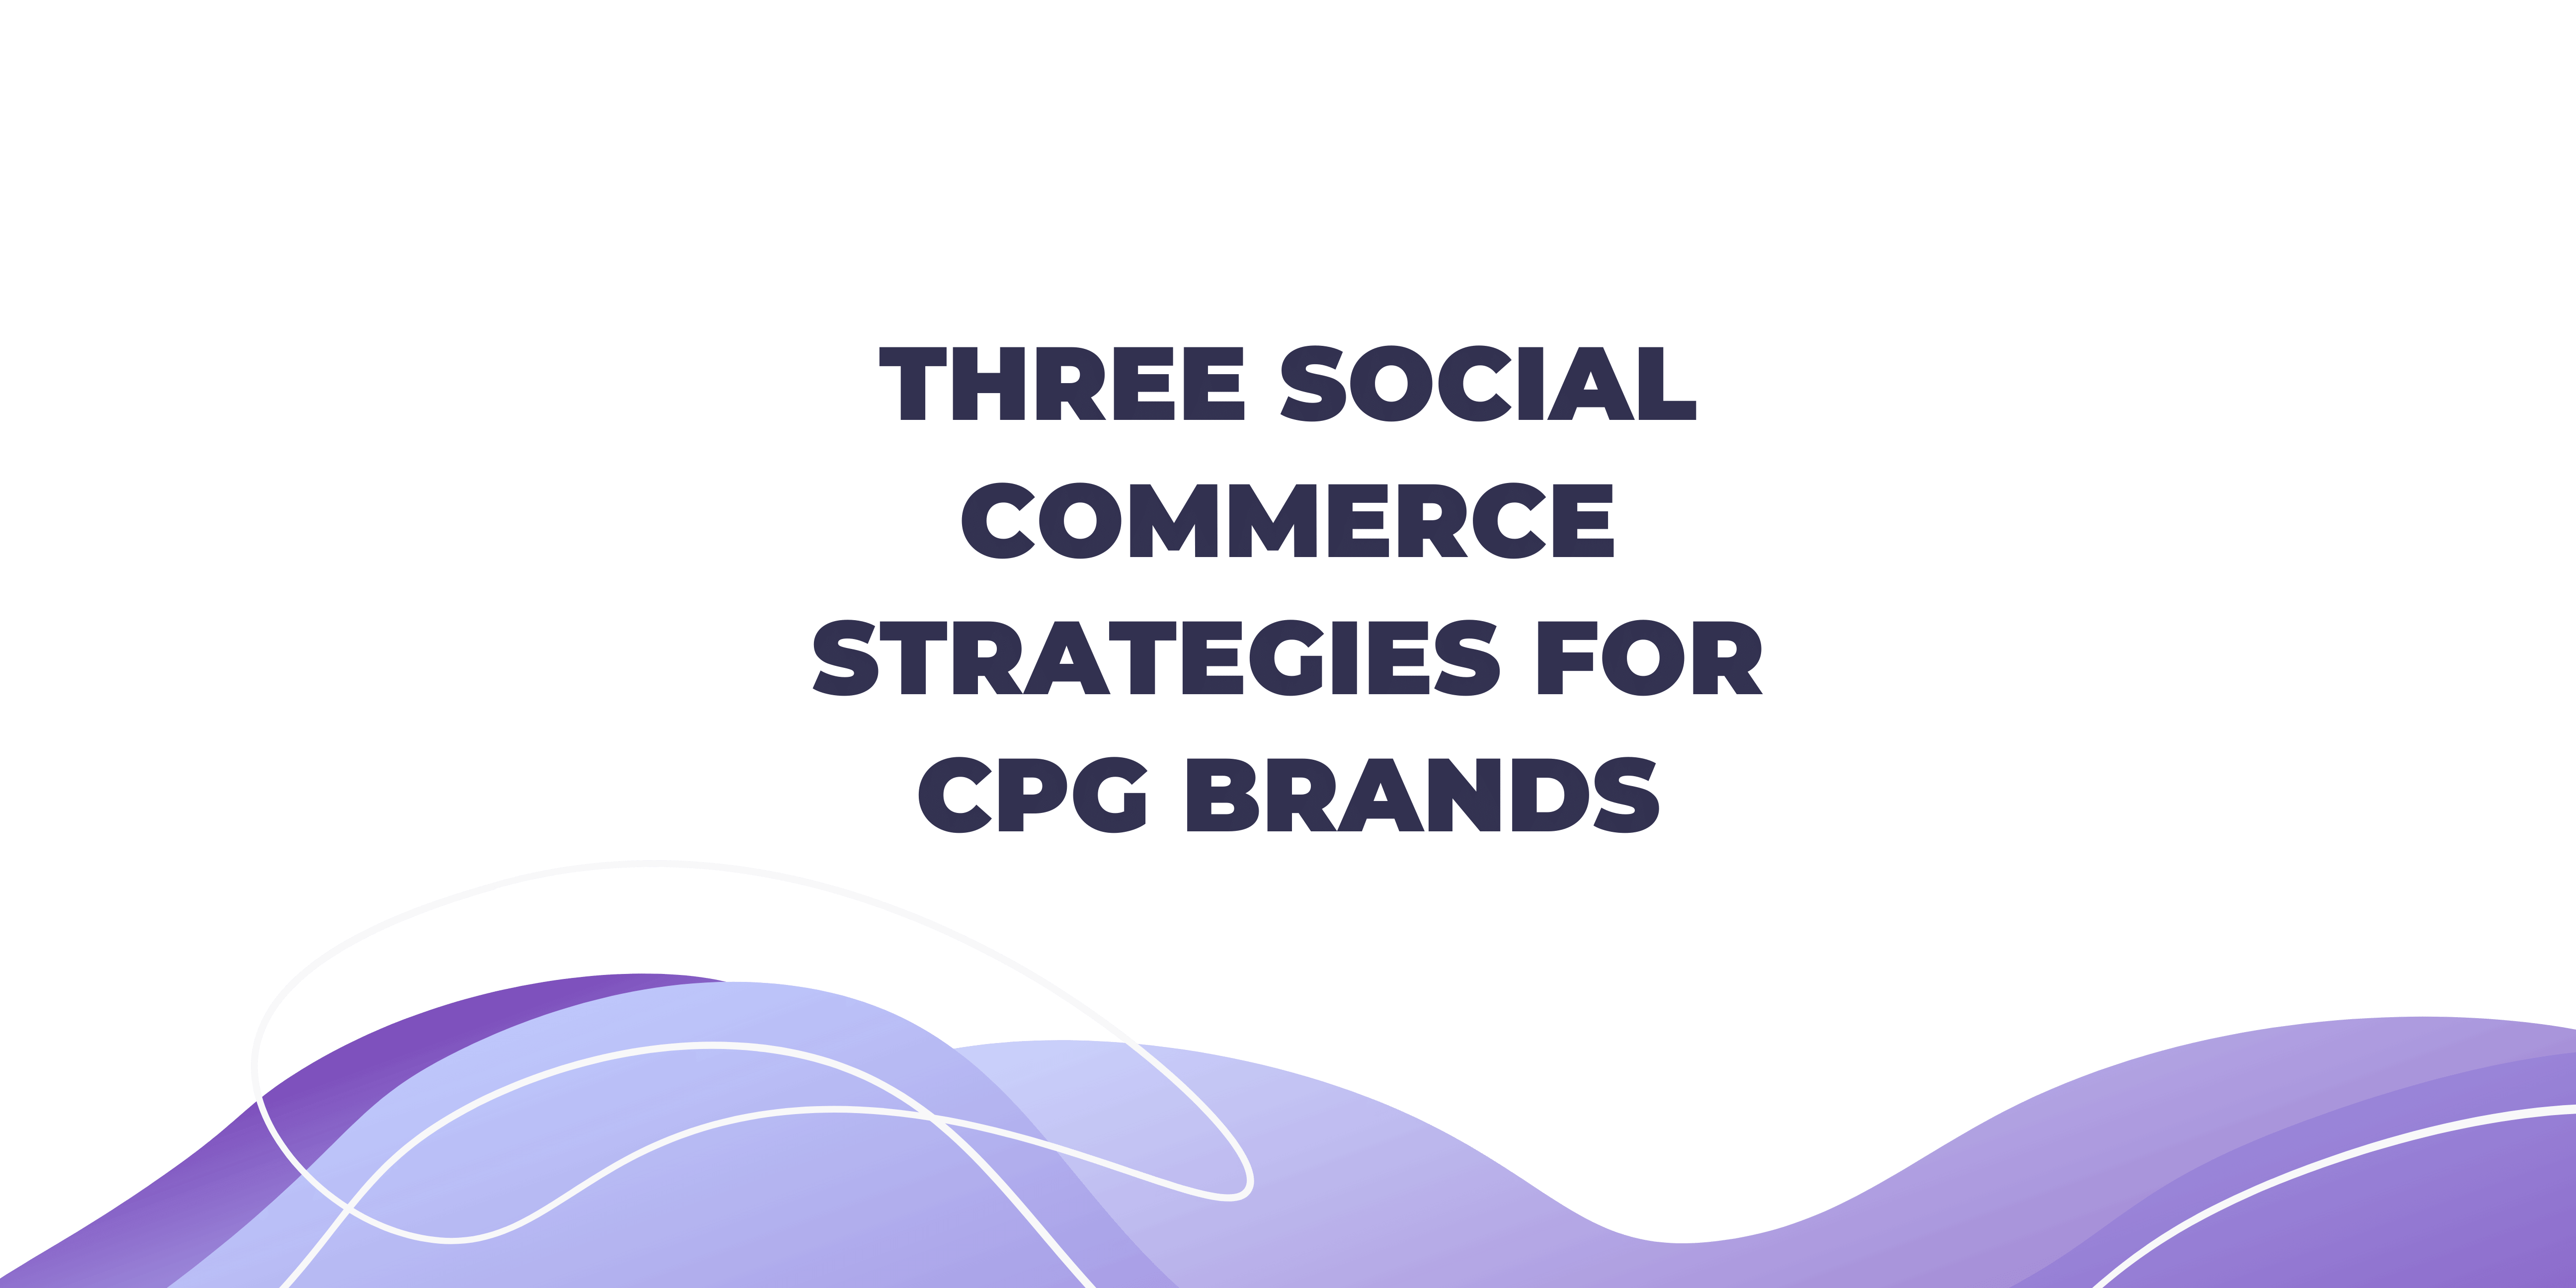 Three Social Commerce Strategies for CPG Brands